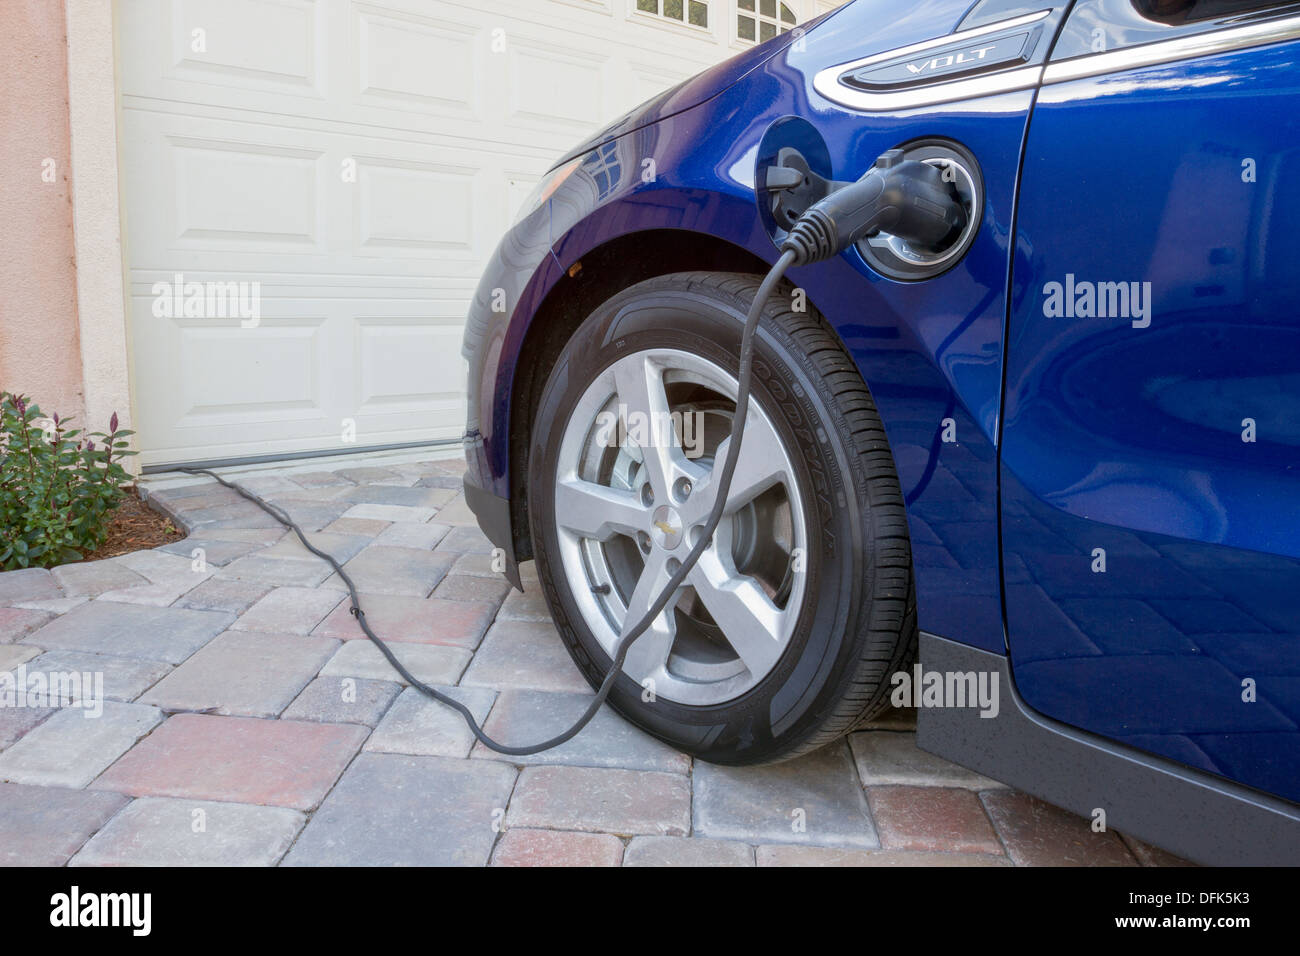 Chevrolet Volt plug-in electric car with connector plugged in charging, at home in a driveway Stock Photo